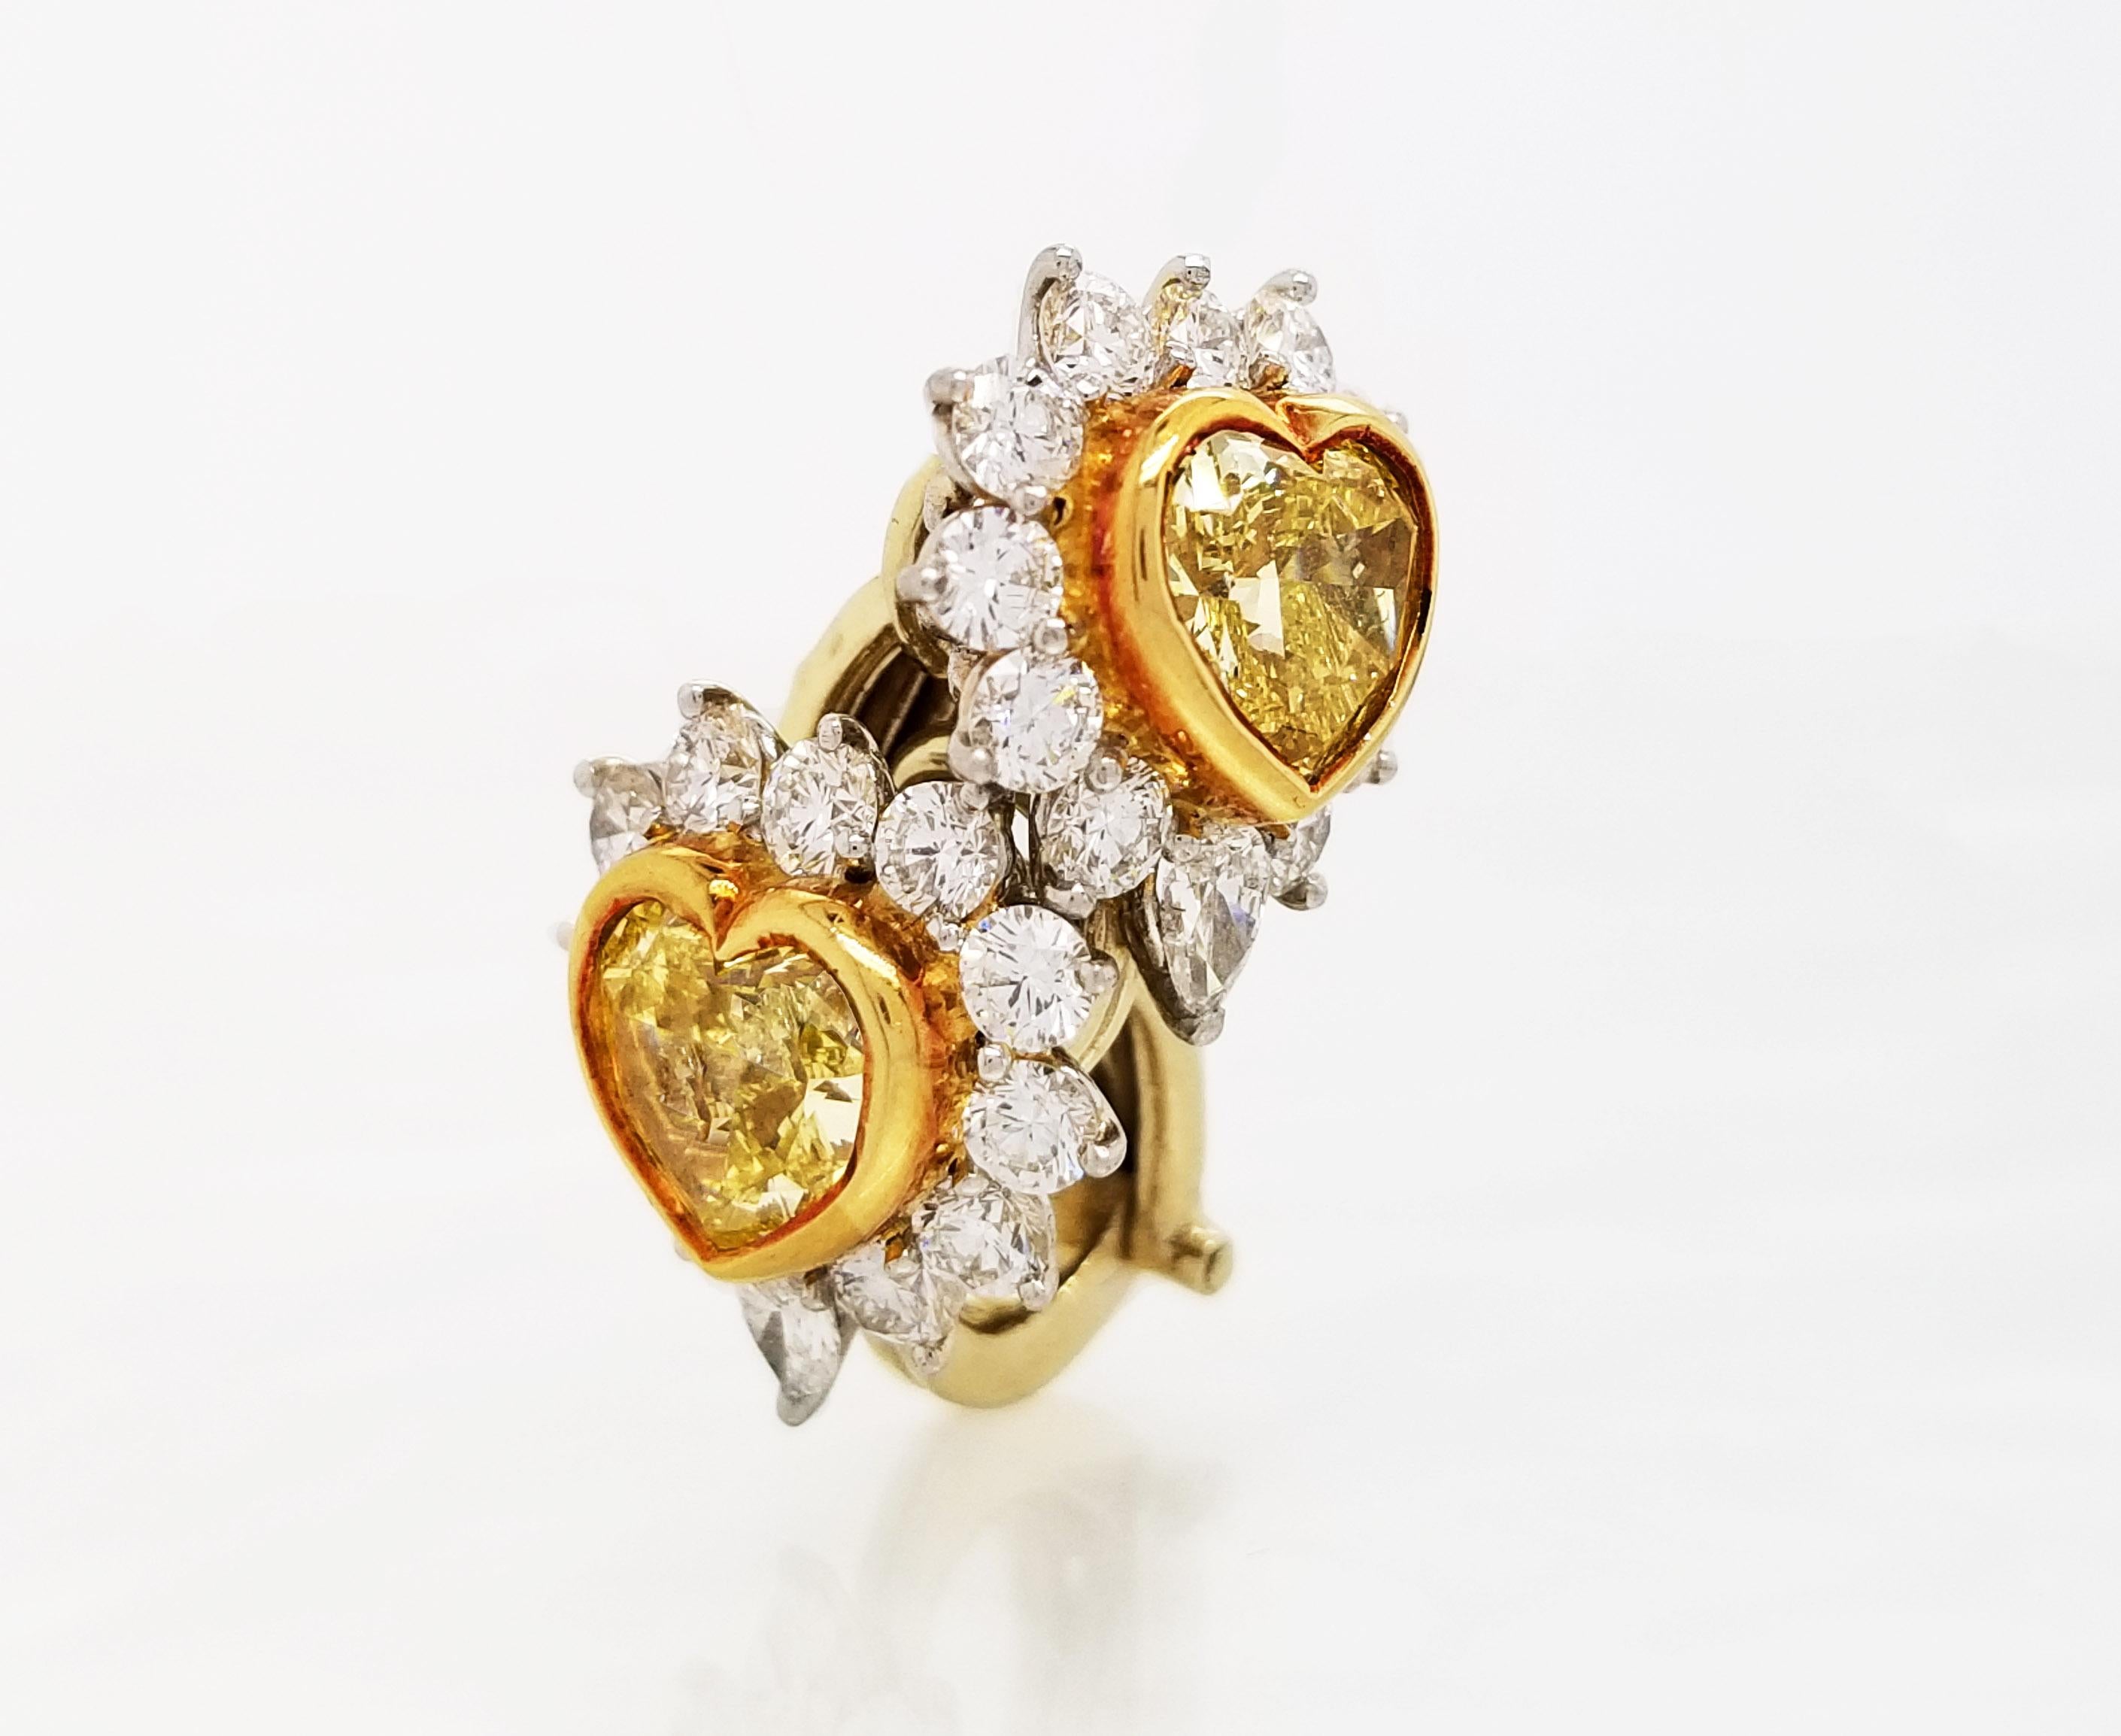 From the Couture Collection at Scarselli, these Fancy Yellow Heart shape Cut Diamonds 1.26 and 1.08 carats with GIA certificates 11011466 and 11011450 respectively (see certificates pictures for detailed stone information) The Yellow Diamonds are